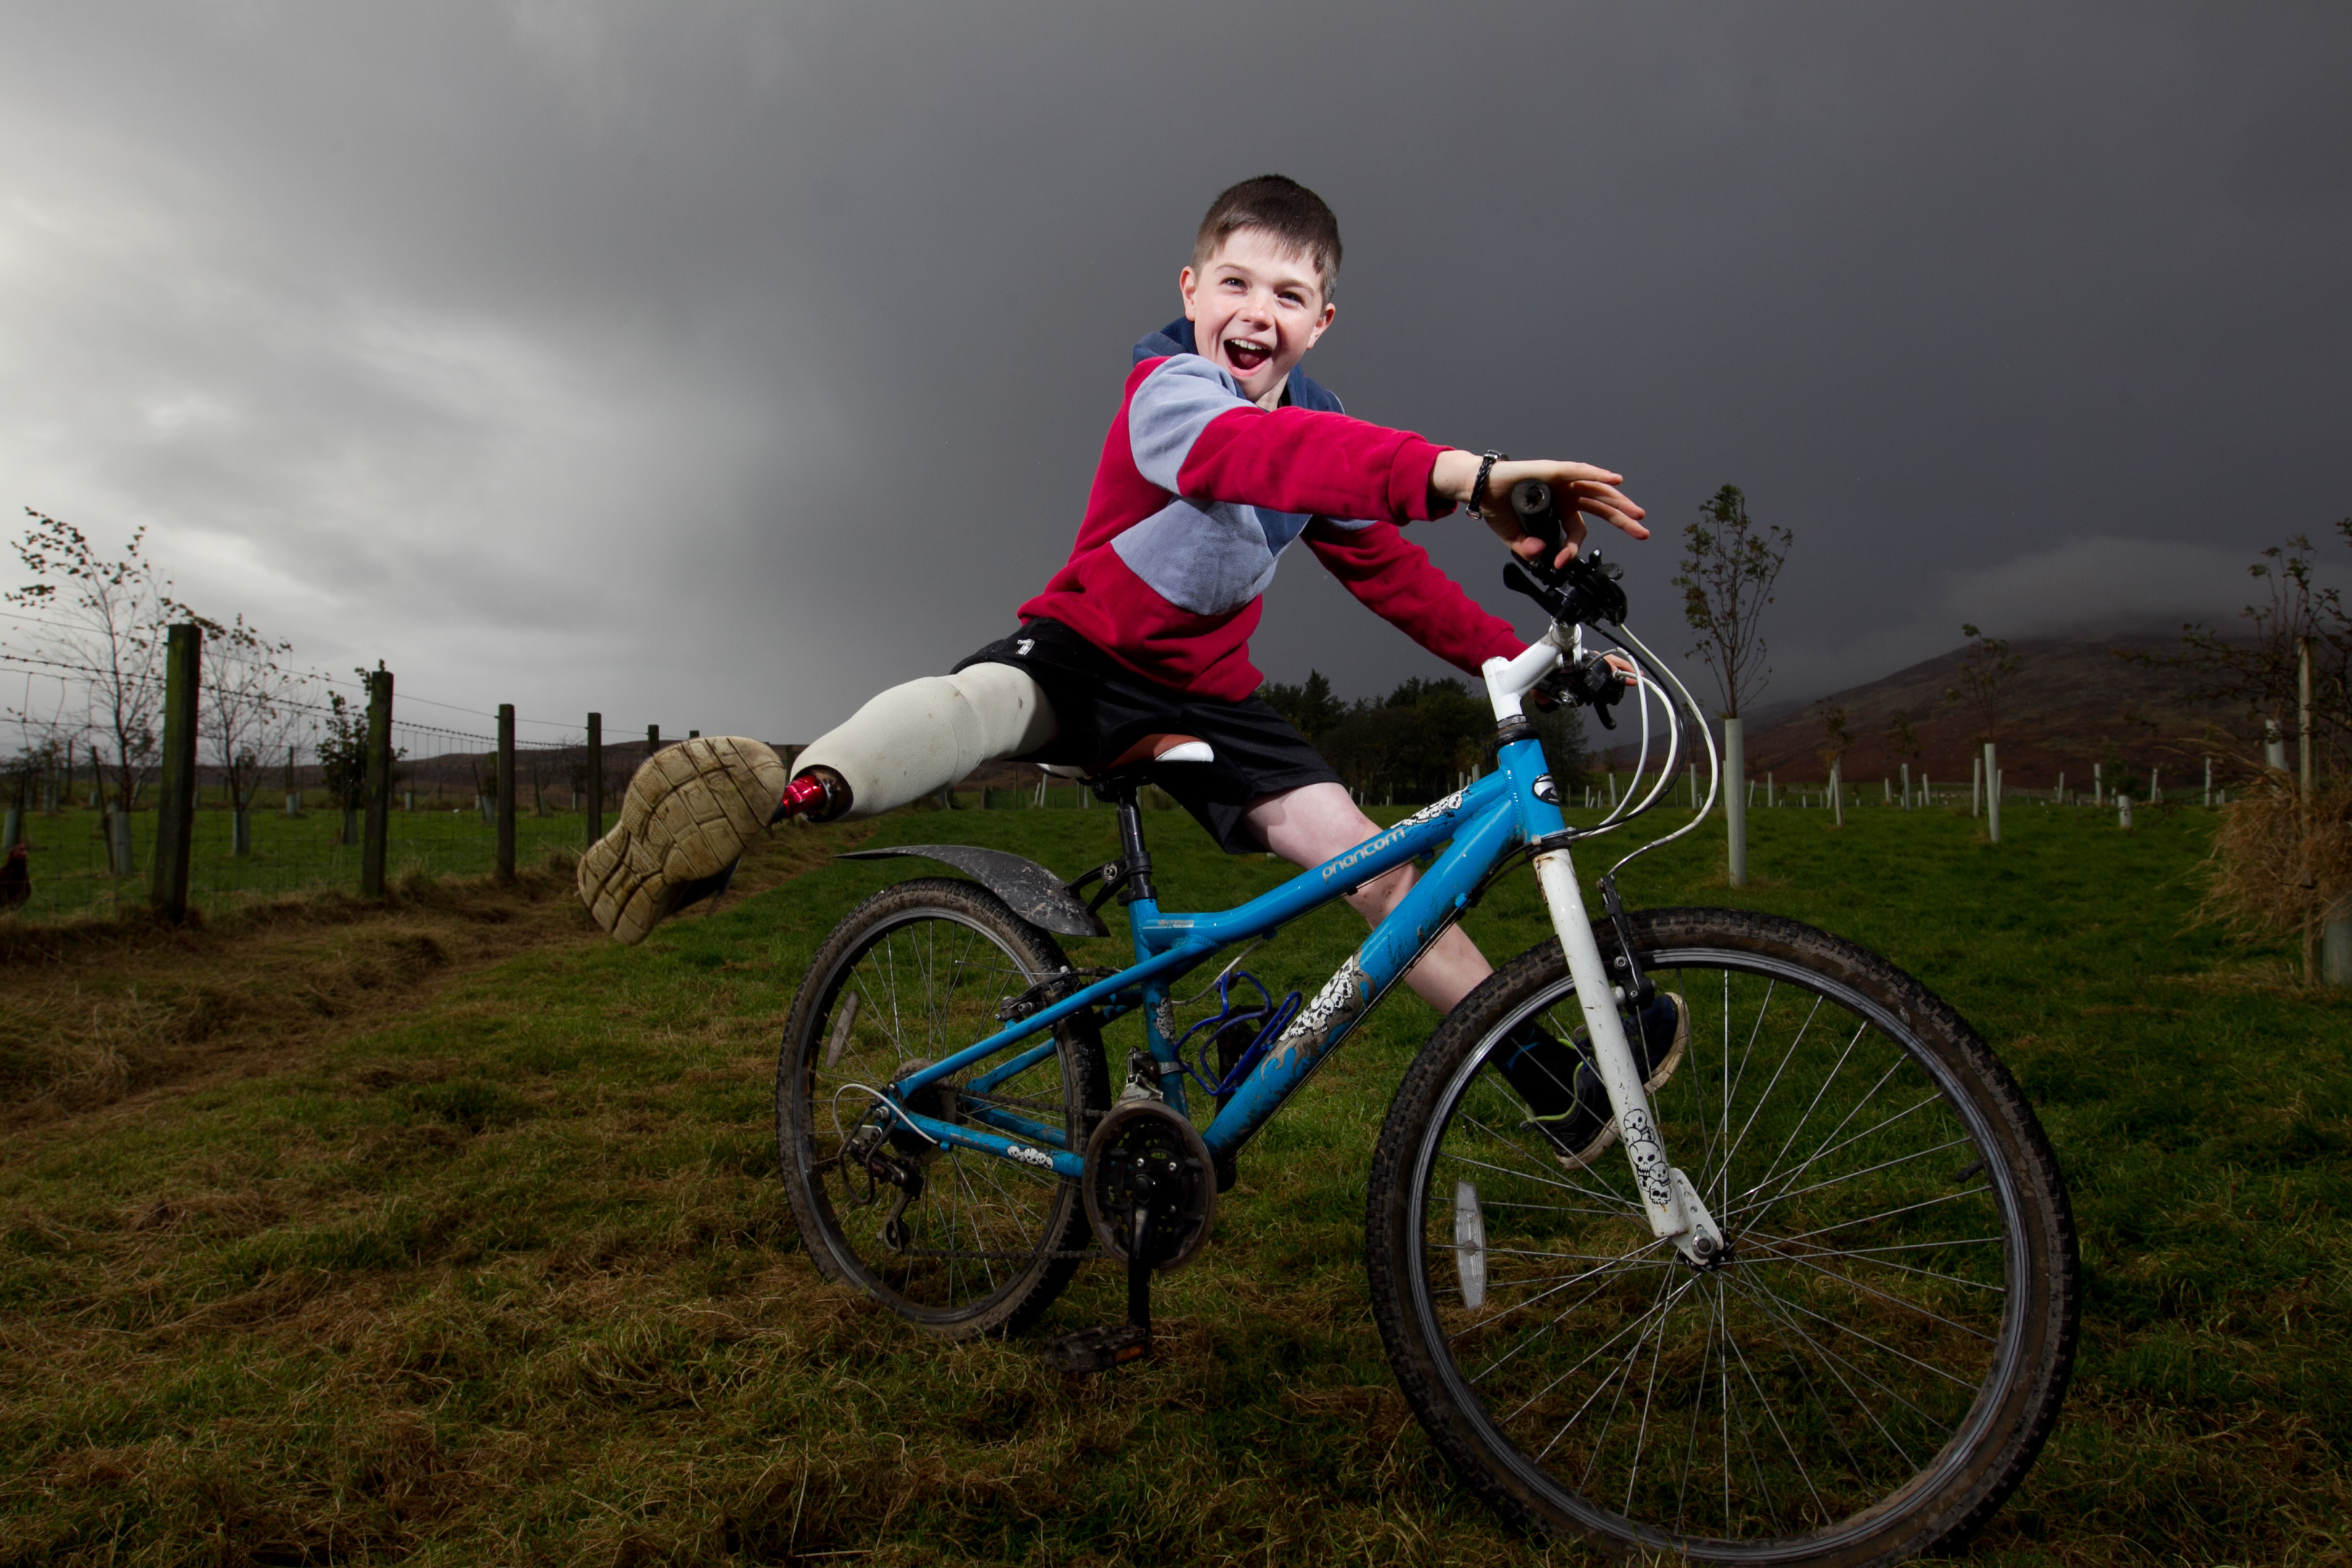 Lewis Kelly lost his leg after an accident on his family farm (Andrew Cawley / DC Thomson)